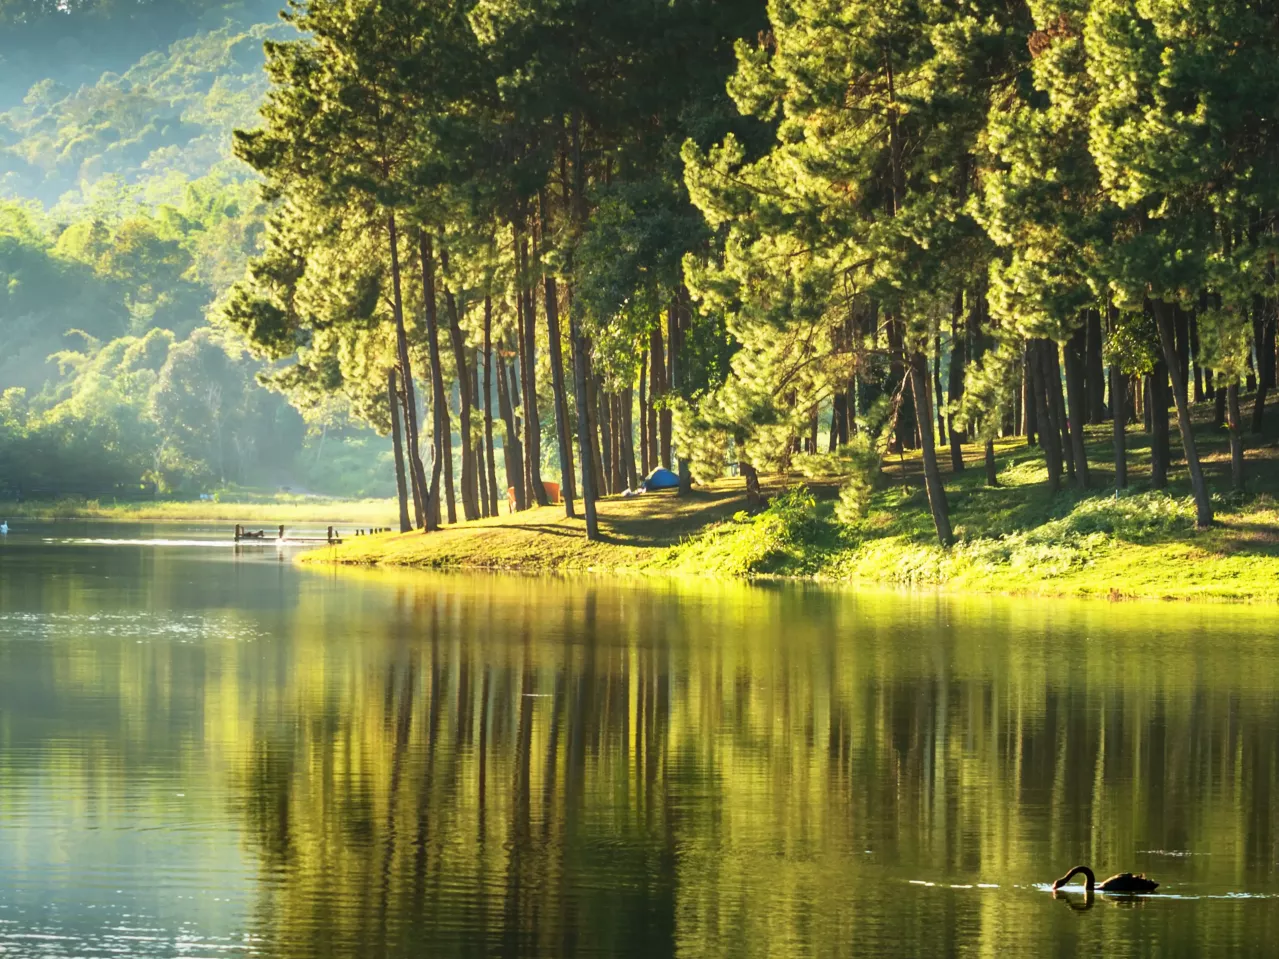 A serene lakeside scene with tall pine trees reflecting on calm water. A solitary duck swims in the lake, and sunlight filters through the trees, creating a peaceful atmosphere. A blue tent can be seen nestled among the trees in the background.